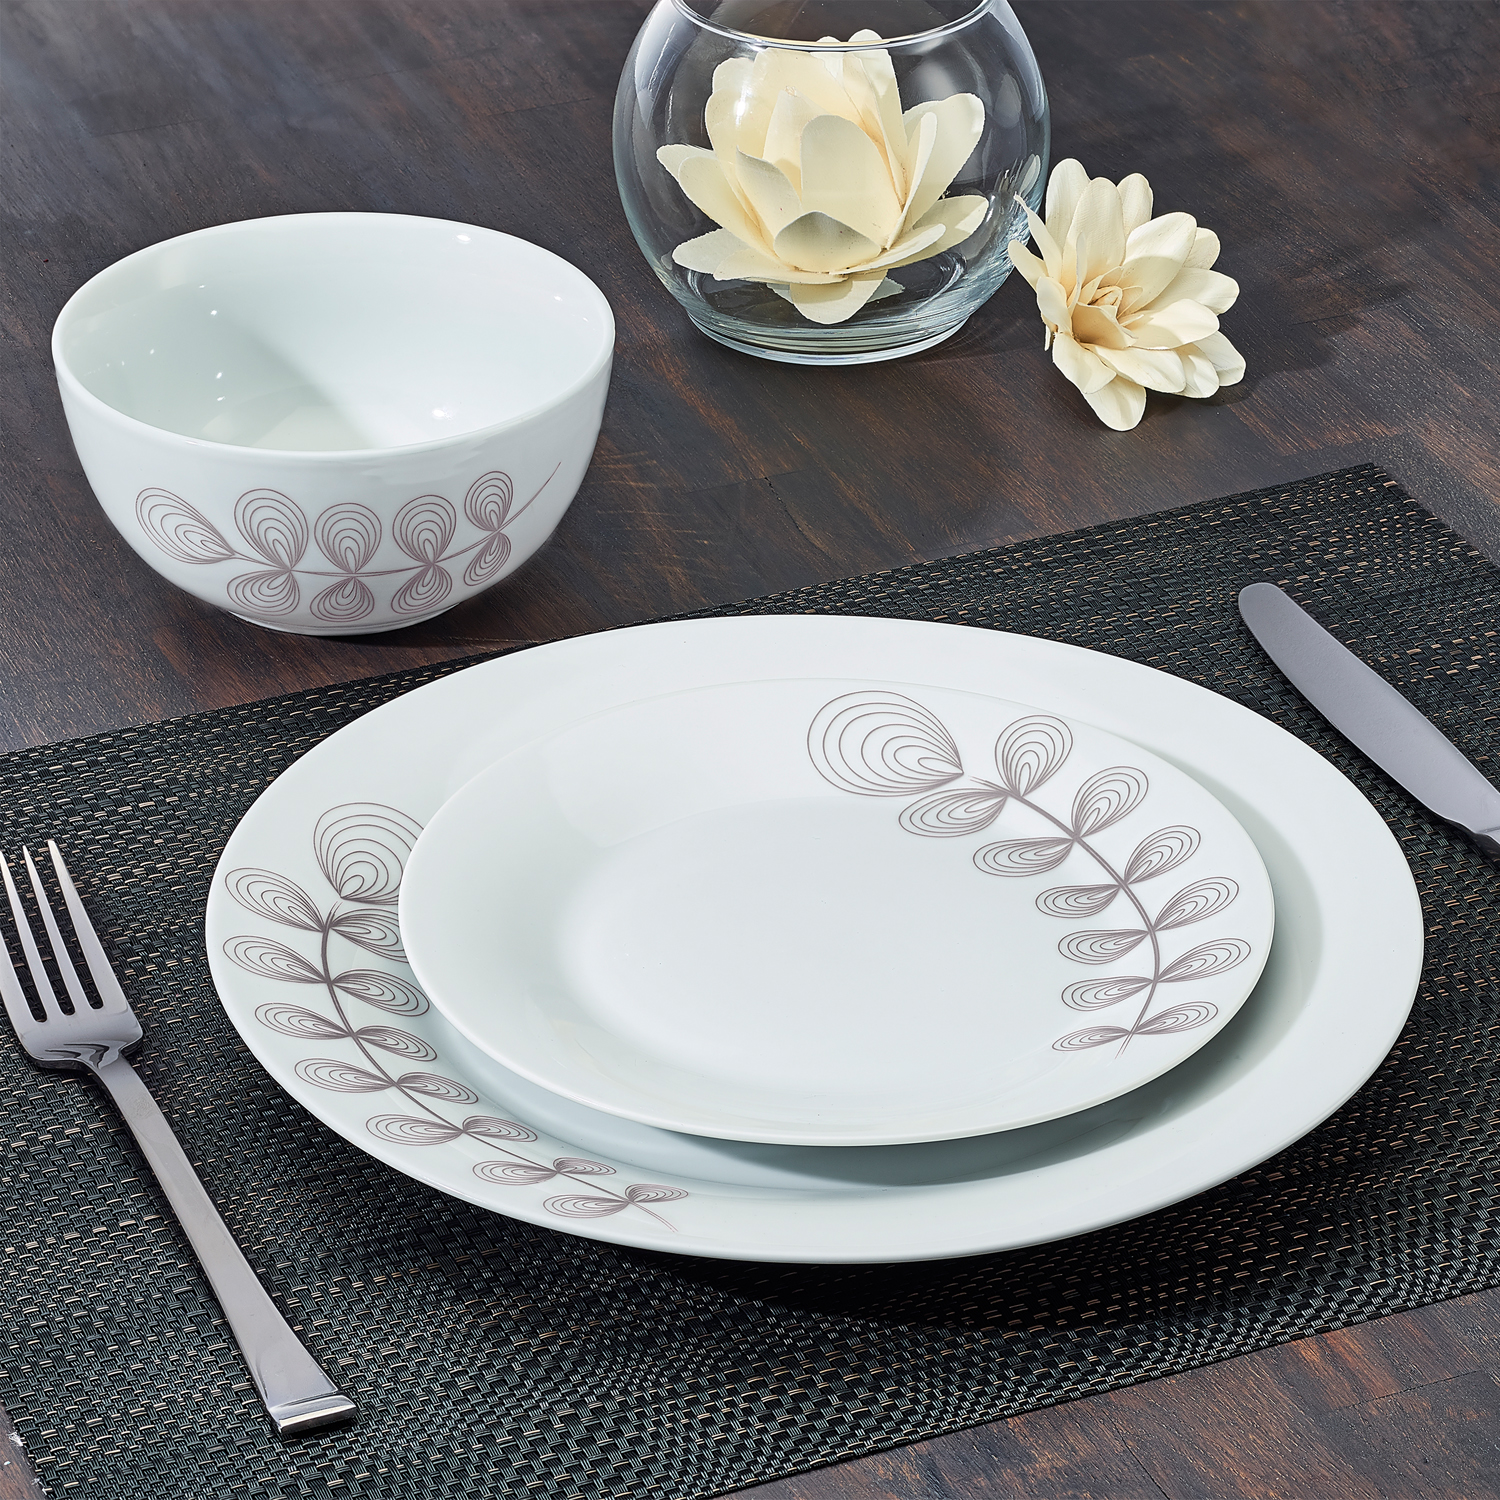 April Floral Collection Taupe 12-Piece Porcelain Dinnerware Set, Walmart Exclusive - image 1 of 5